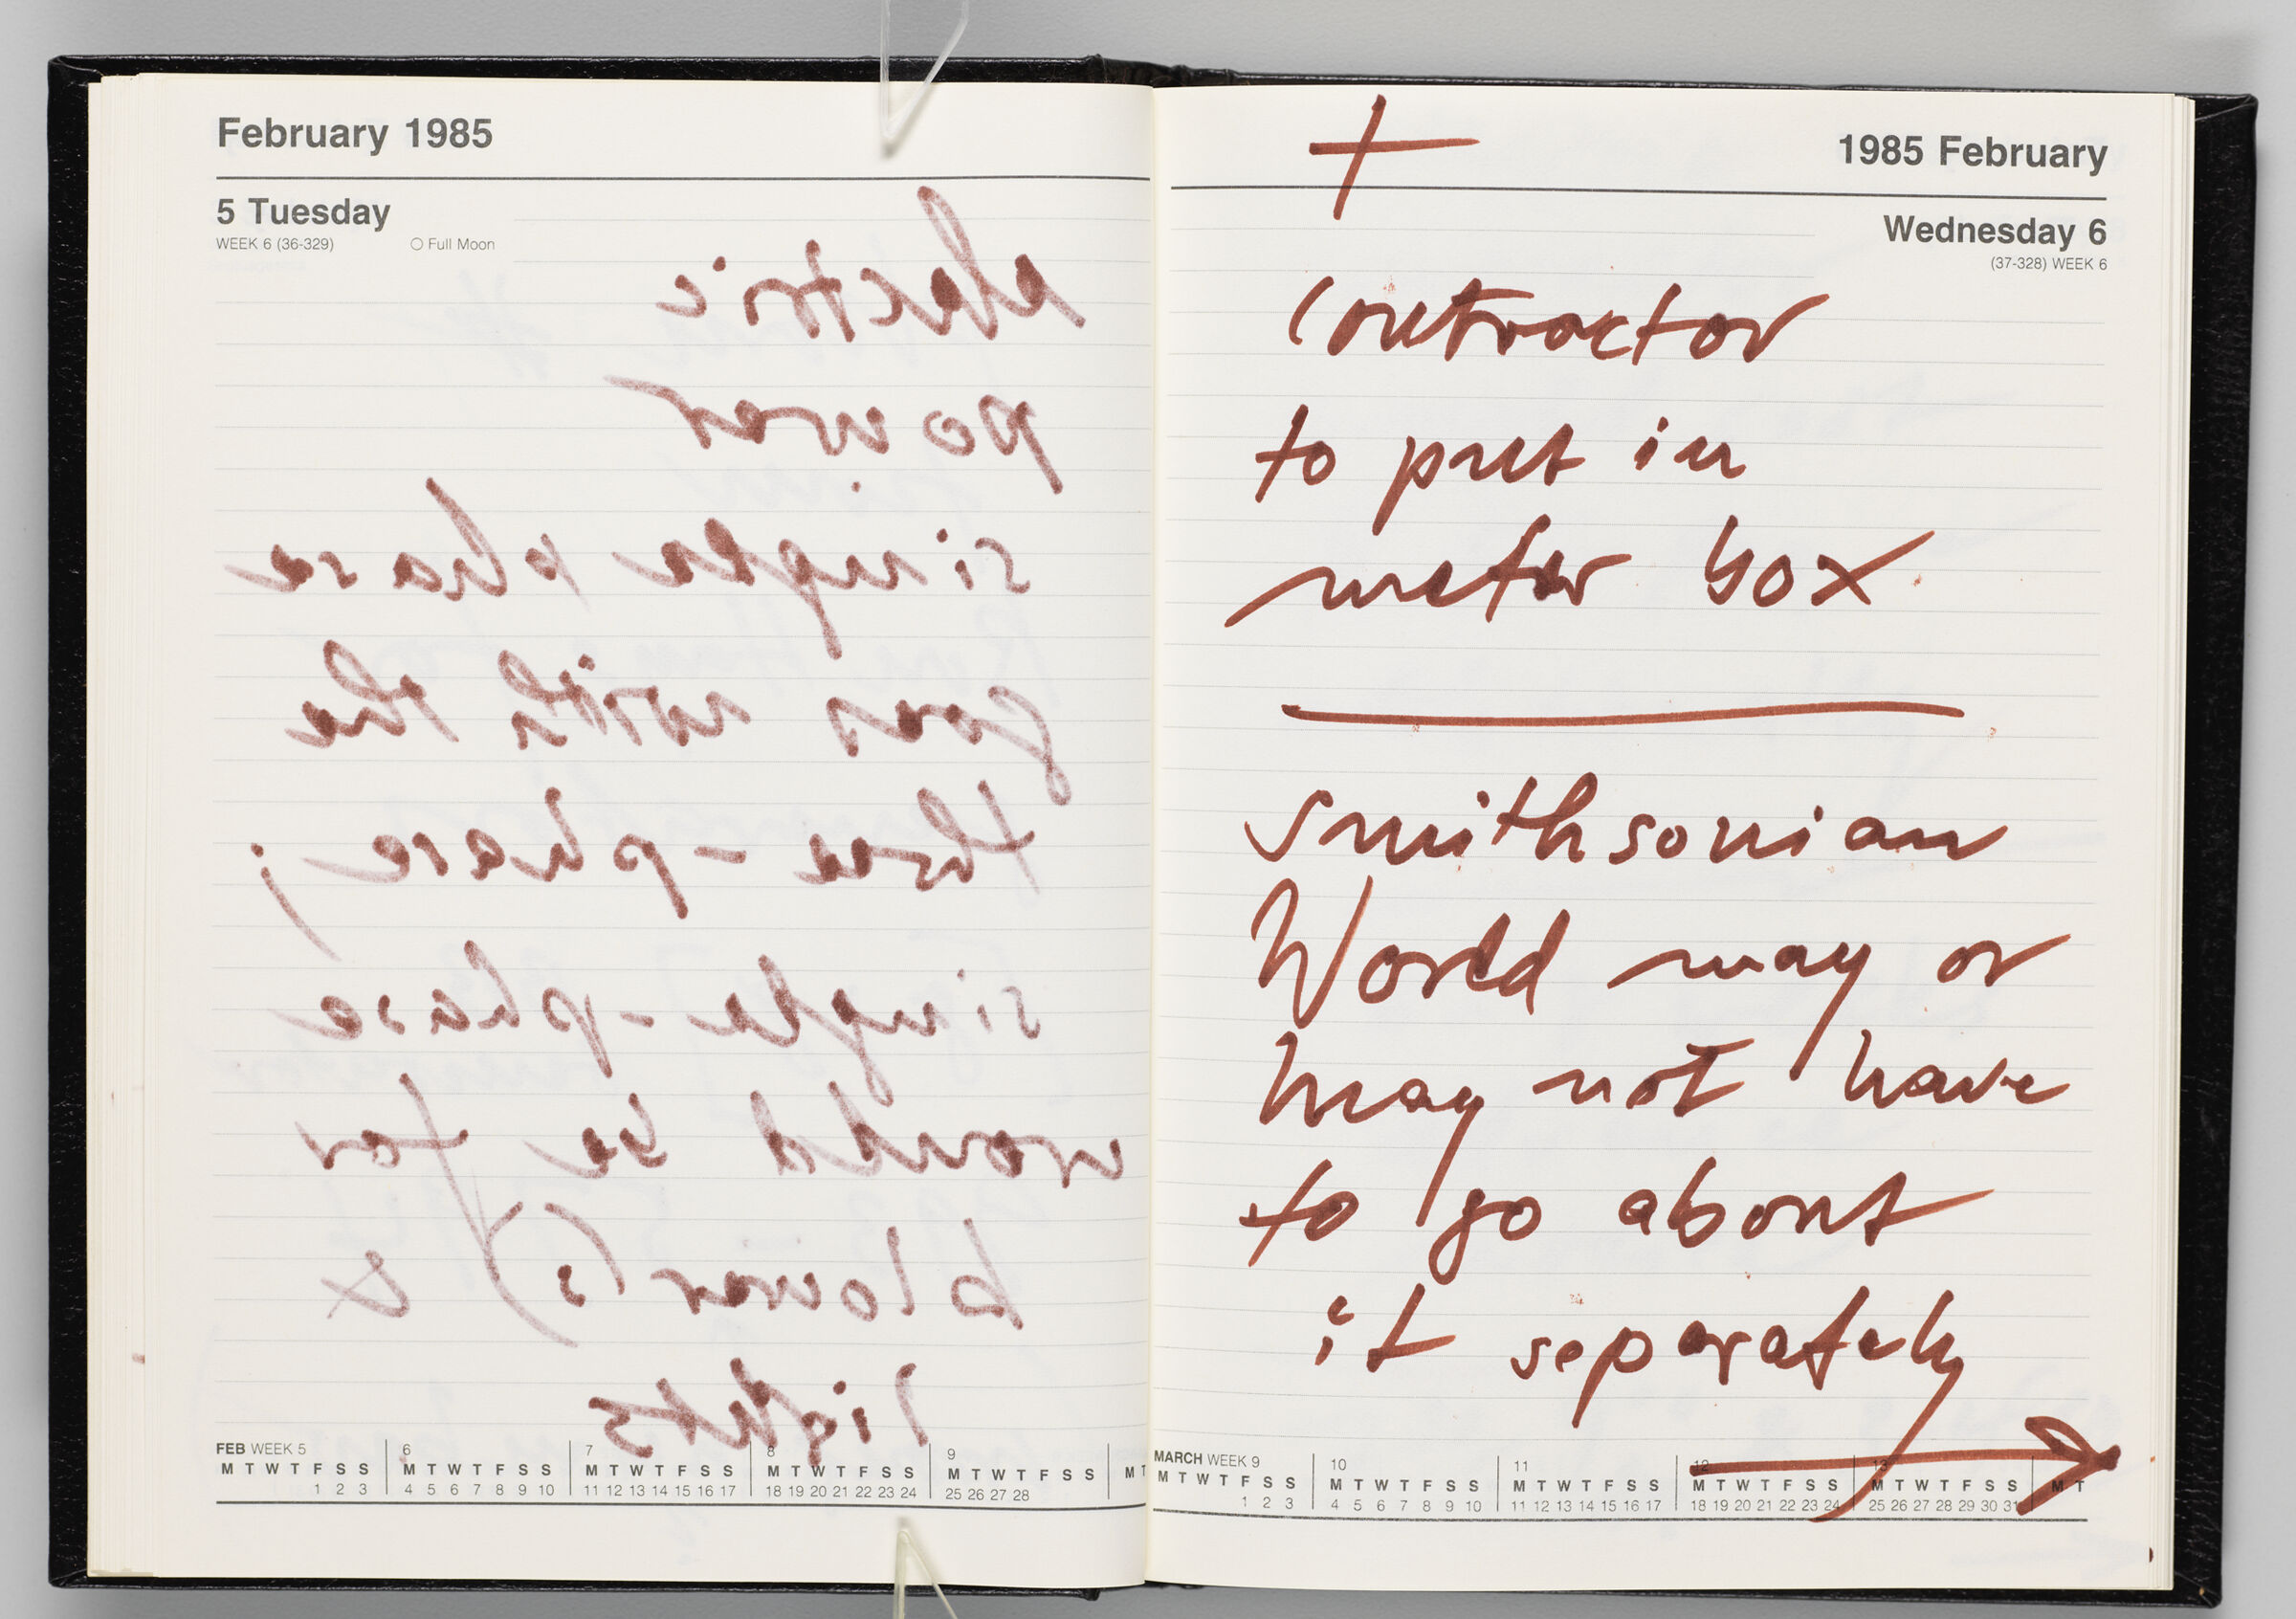 Untitled (Bleed-Through Of Previous Page, Left Page); Untitled (Notes On Calendar Page February 6, 1985, Right Page)